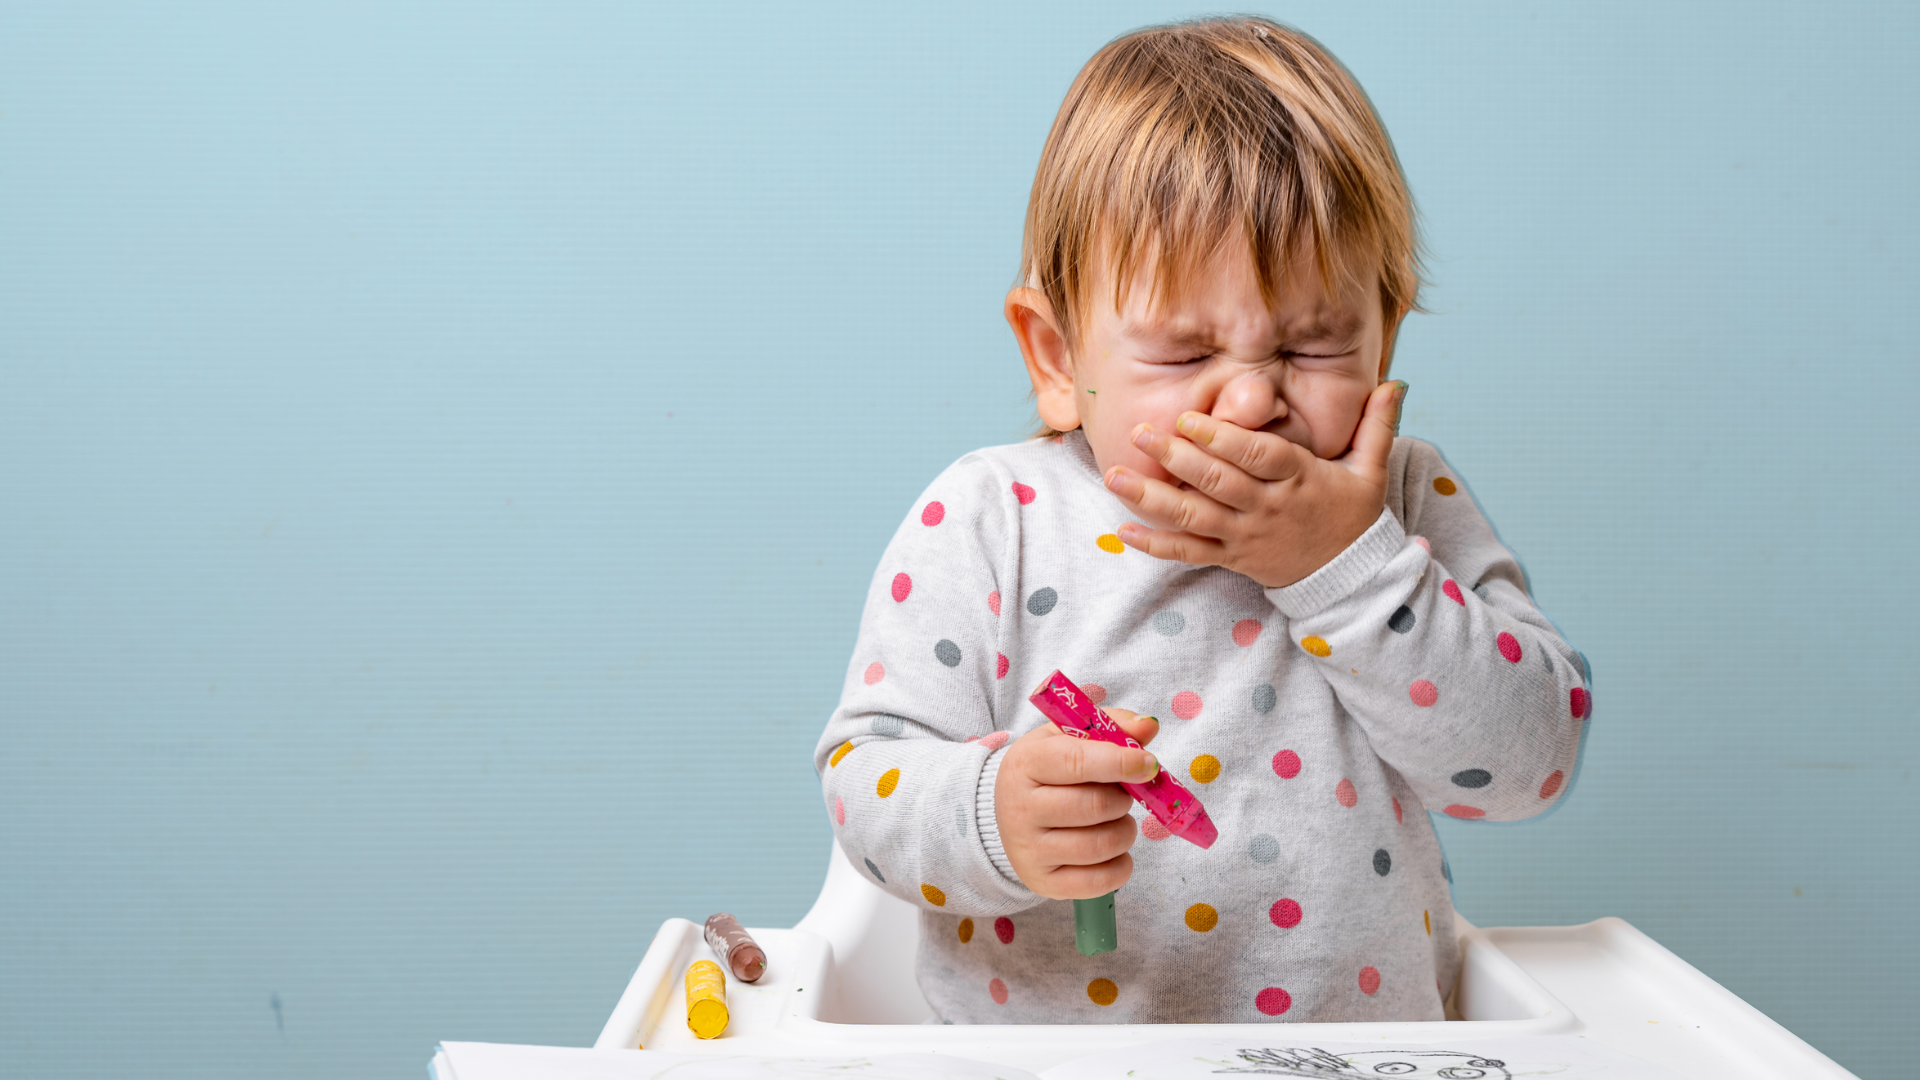 Contagious and Non-Contagious Illnesses: When Should You Keep Your Child at Home from Daycare?